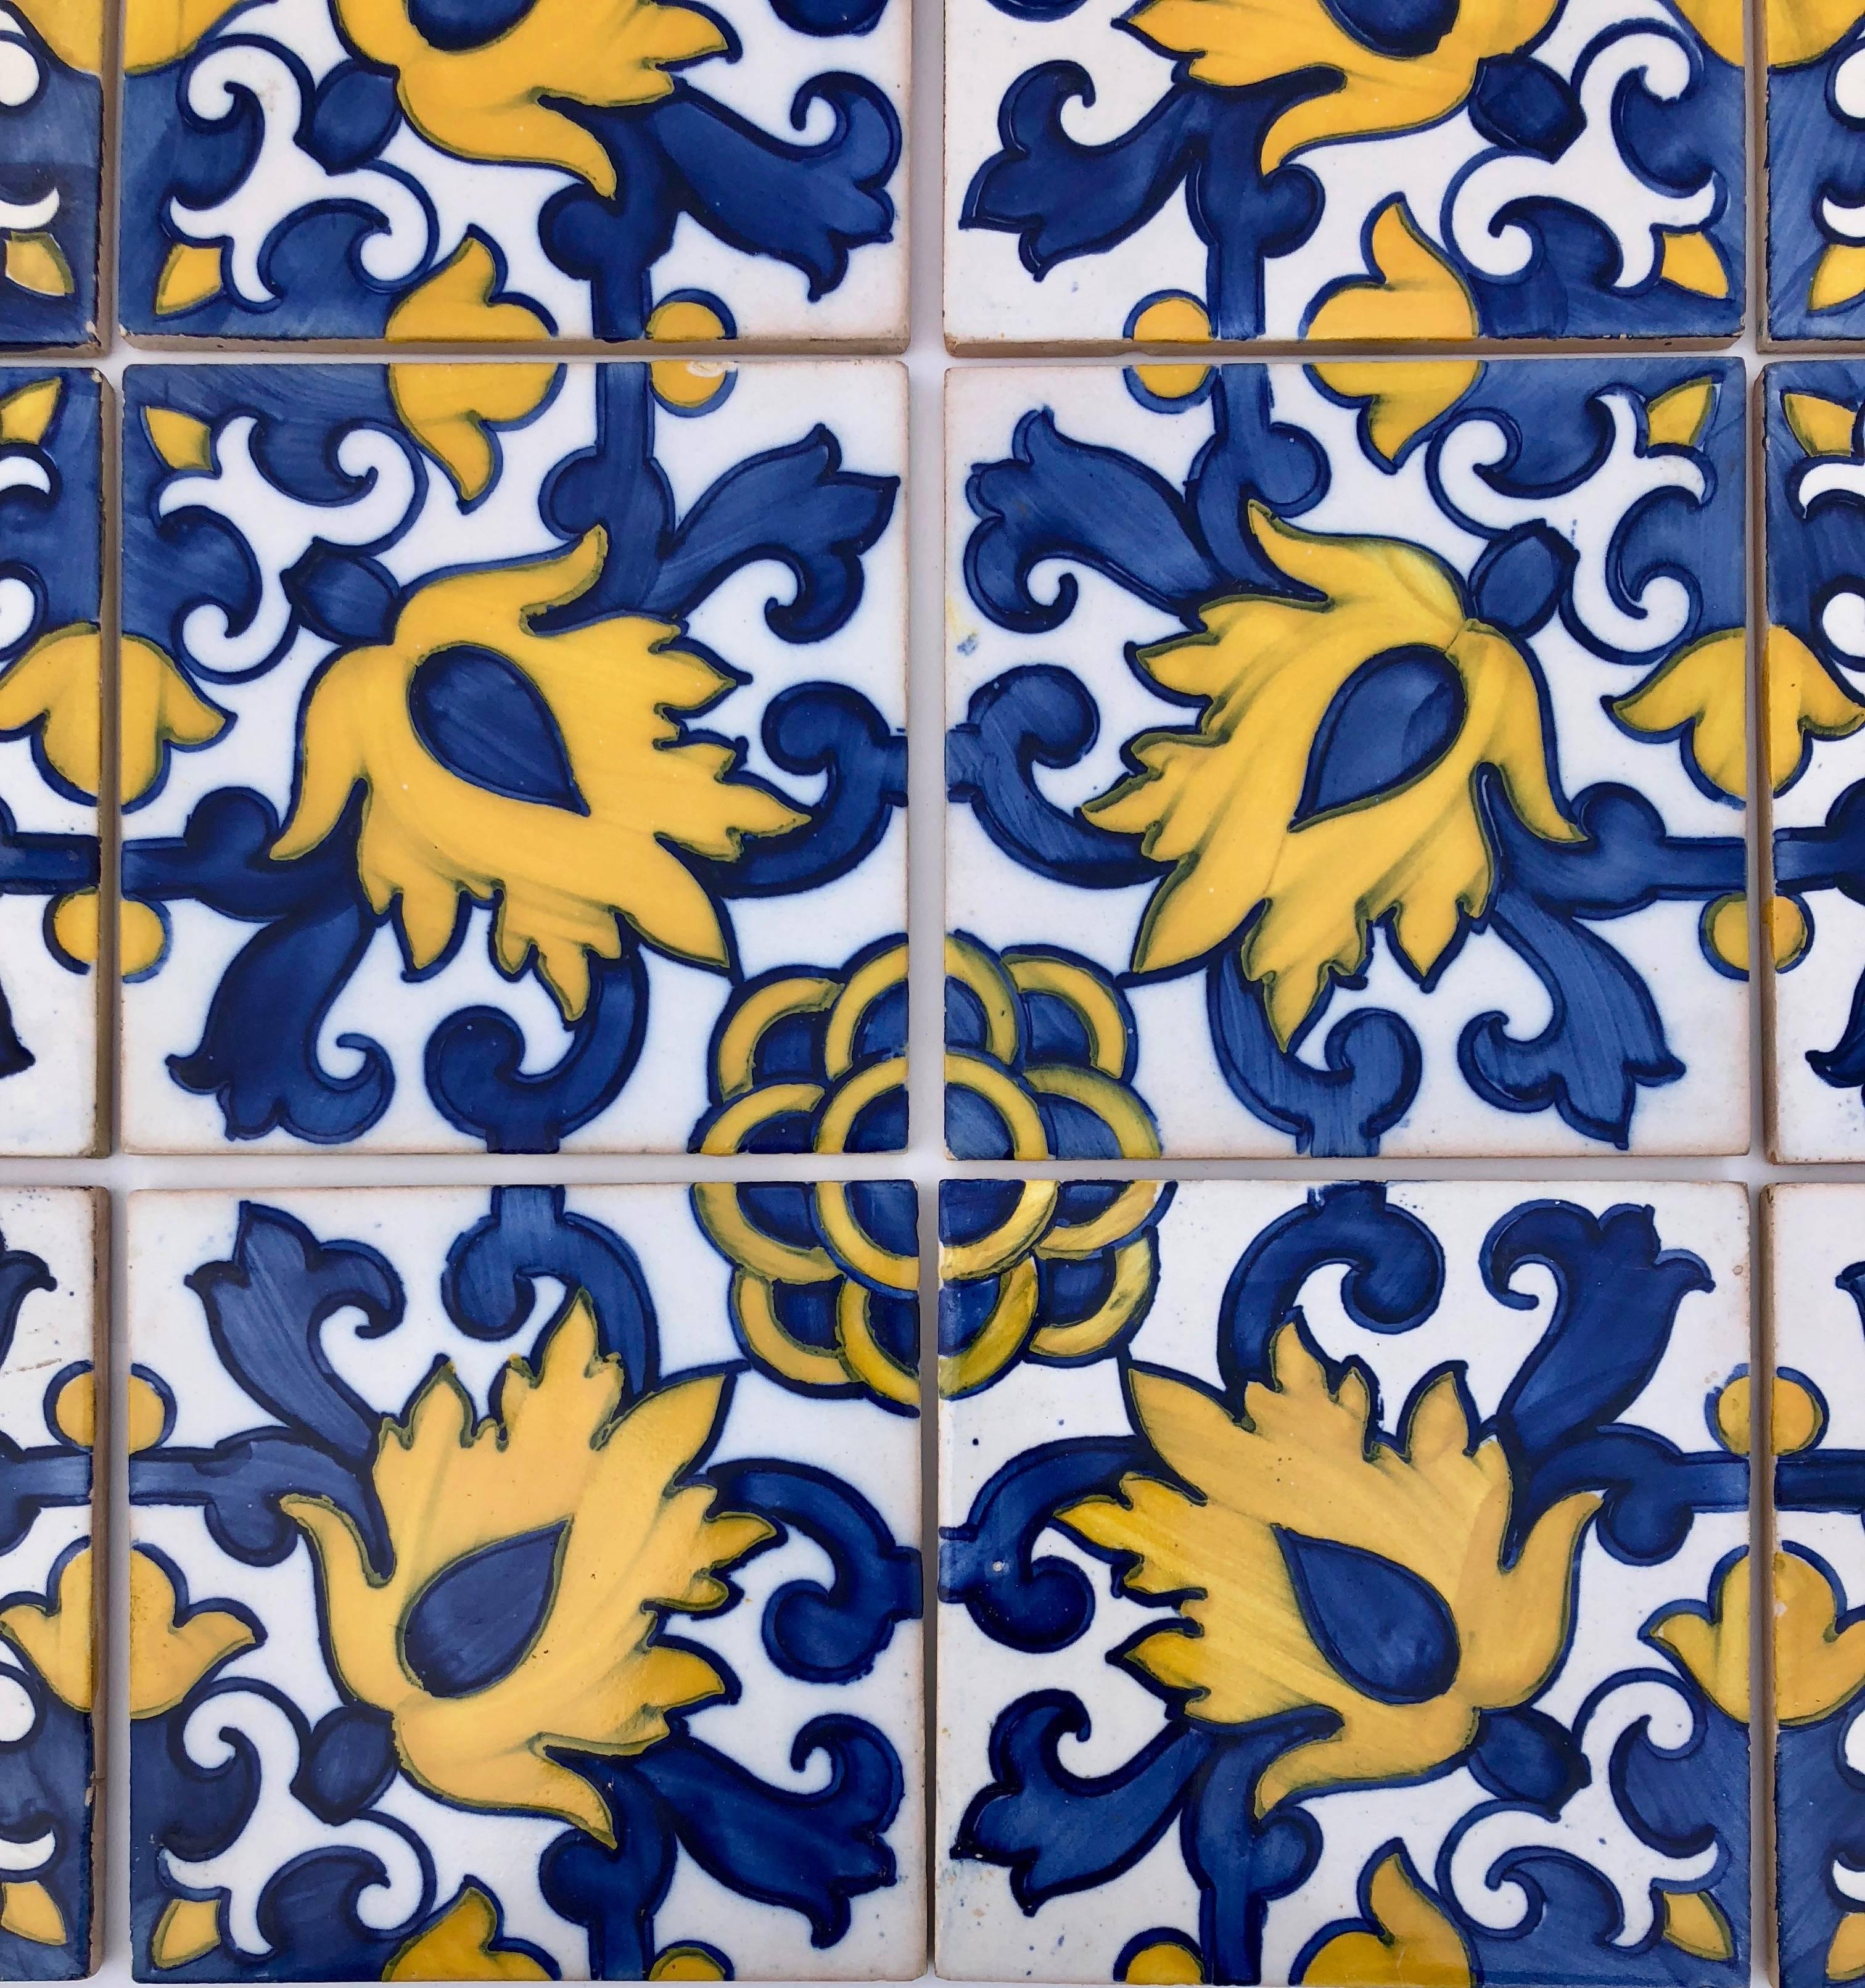 These tiles are beautiful with vibrant blues and yellows on a white background in a lovely design. They could be used to add a touch of color to a bathroom or kitchen all or as coasters or trivets on a table, the possibilities are endless.
 